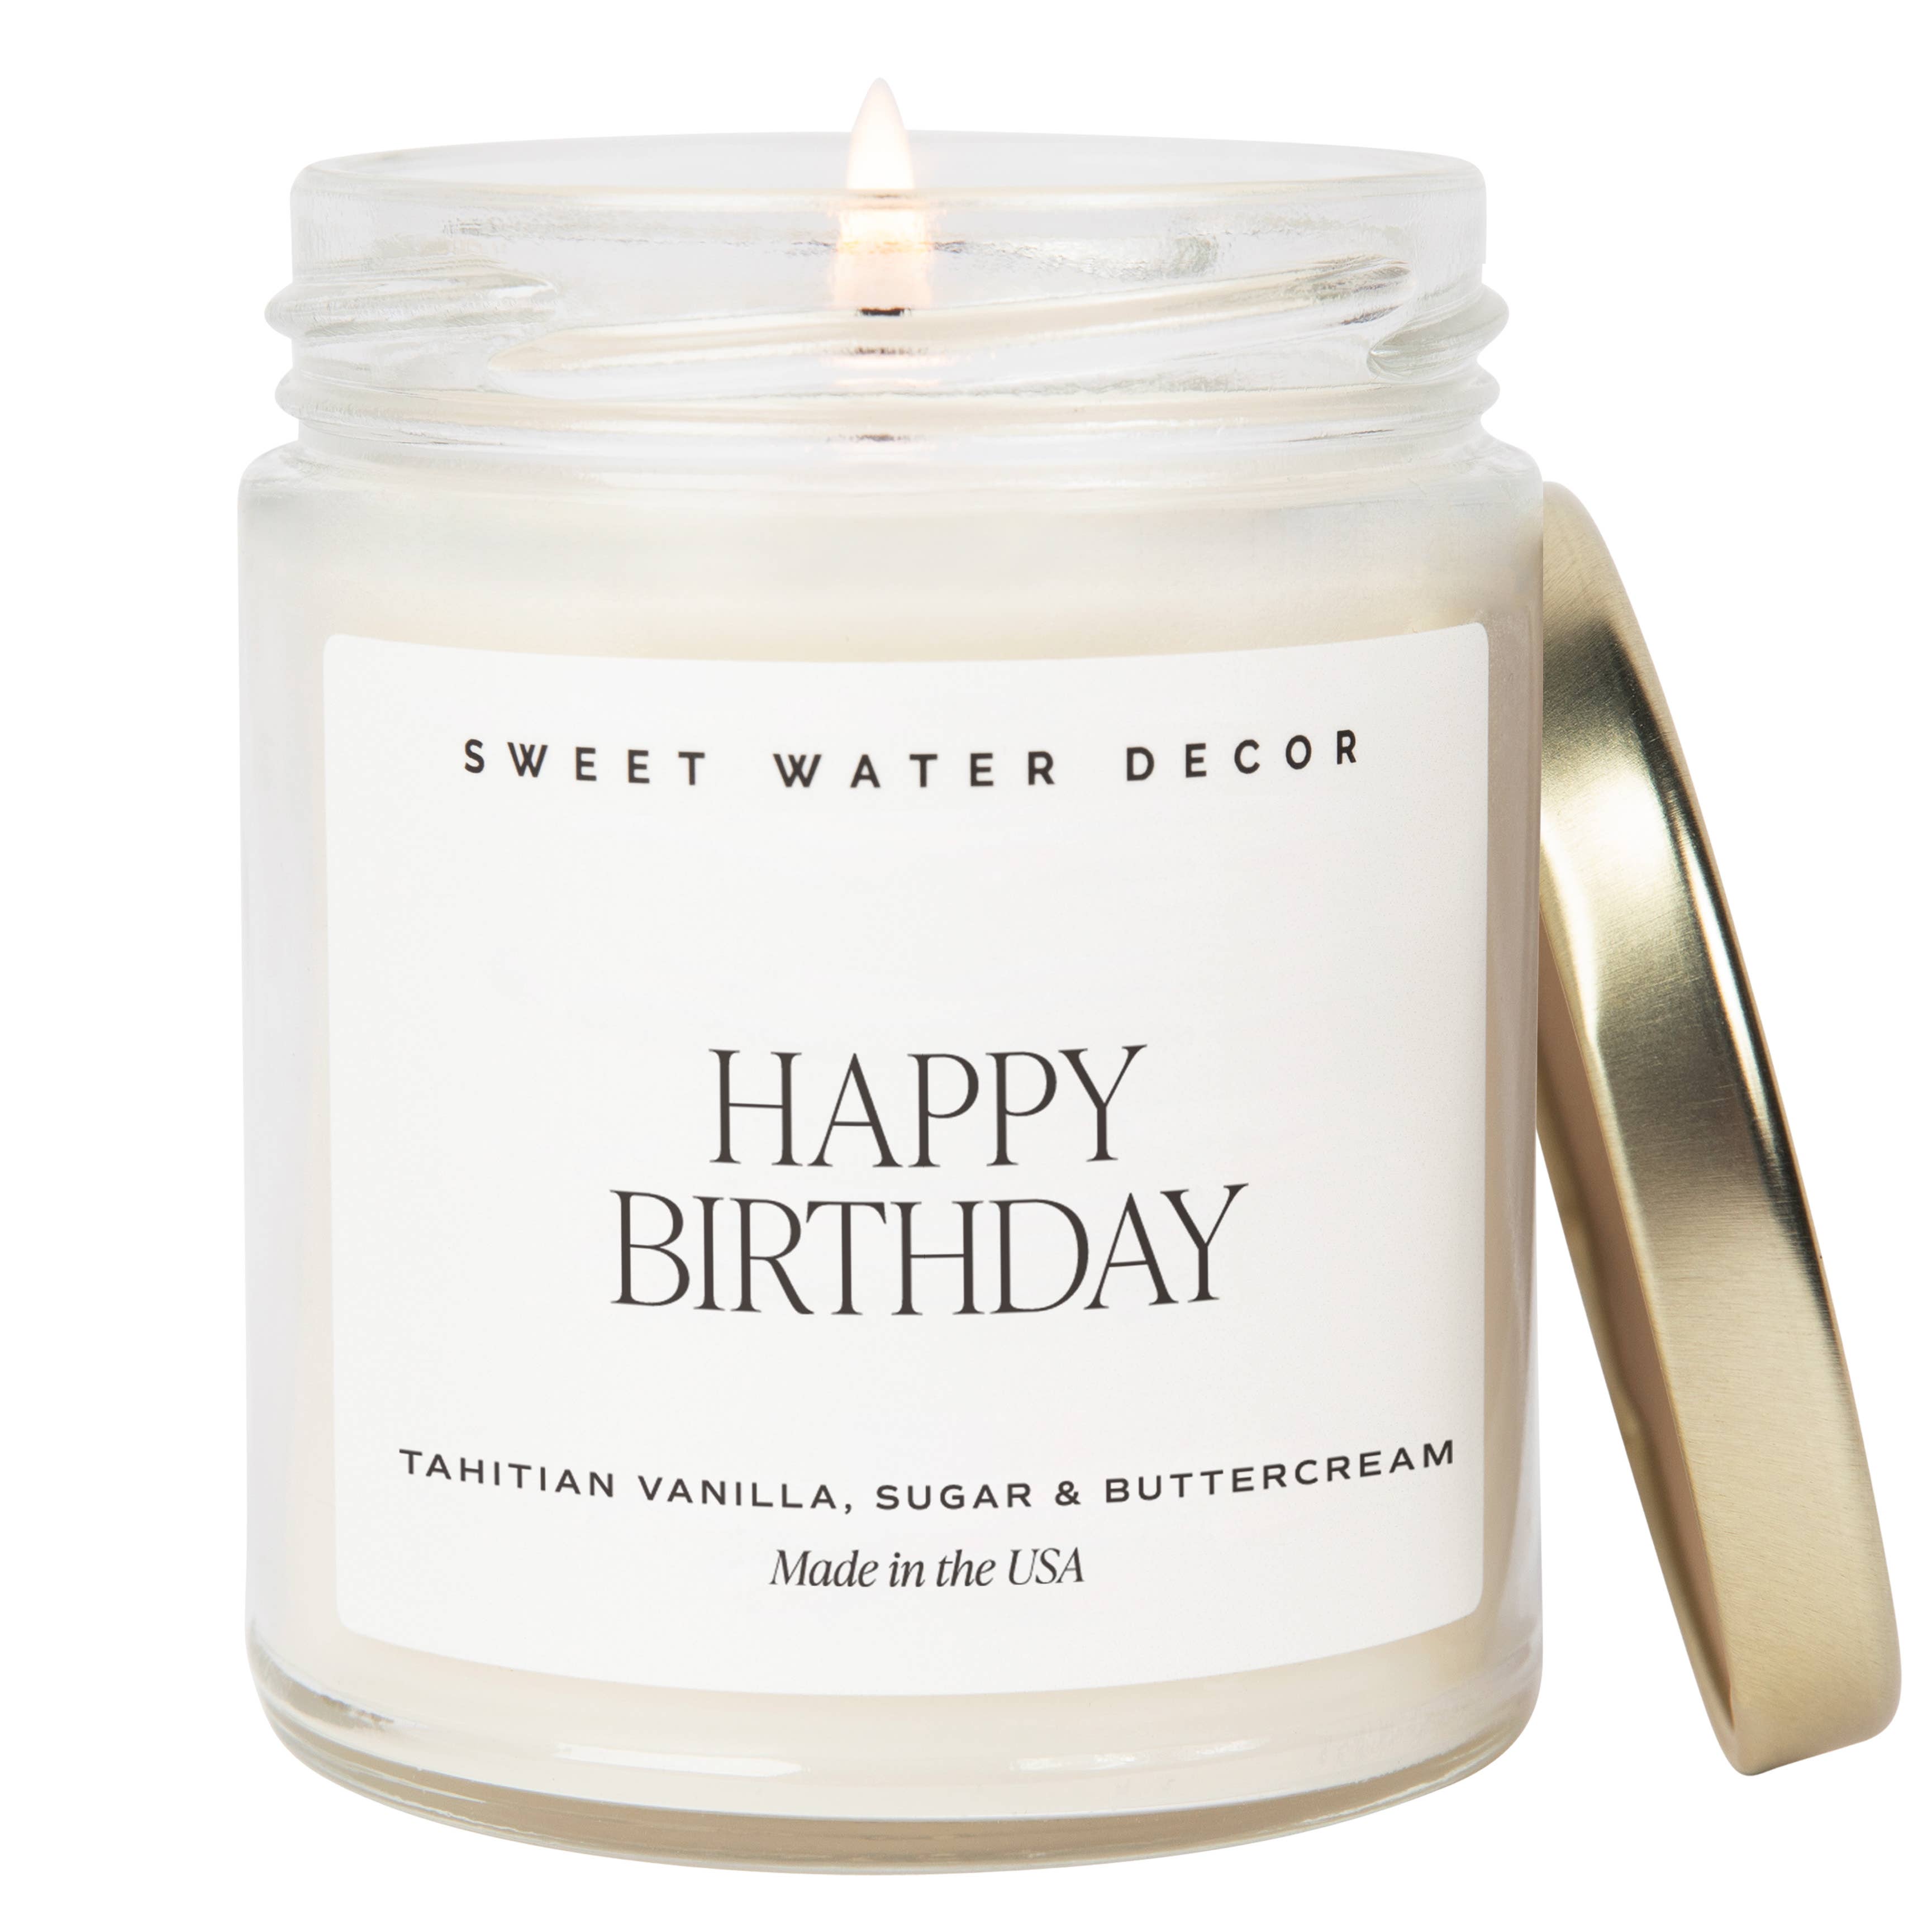 Sweet Water Decor - Happy Birthday 9 oz Soy Candle - Gifts & Home Decor